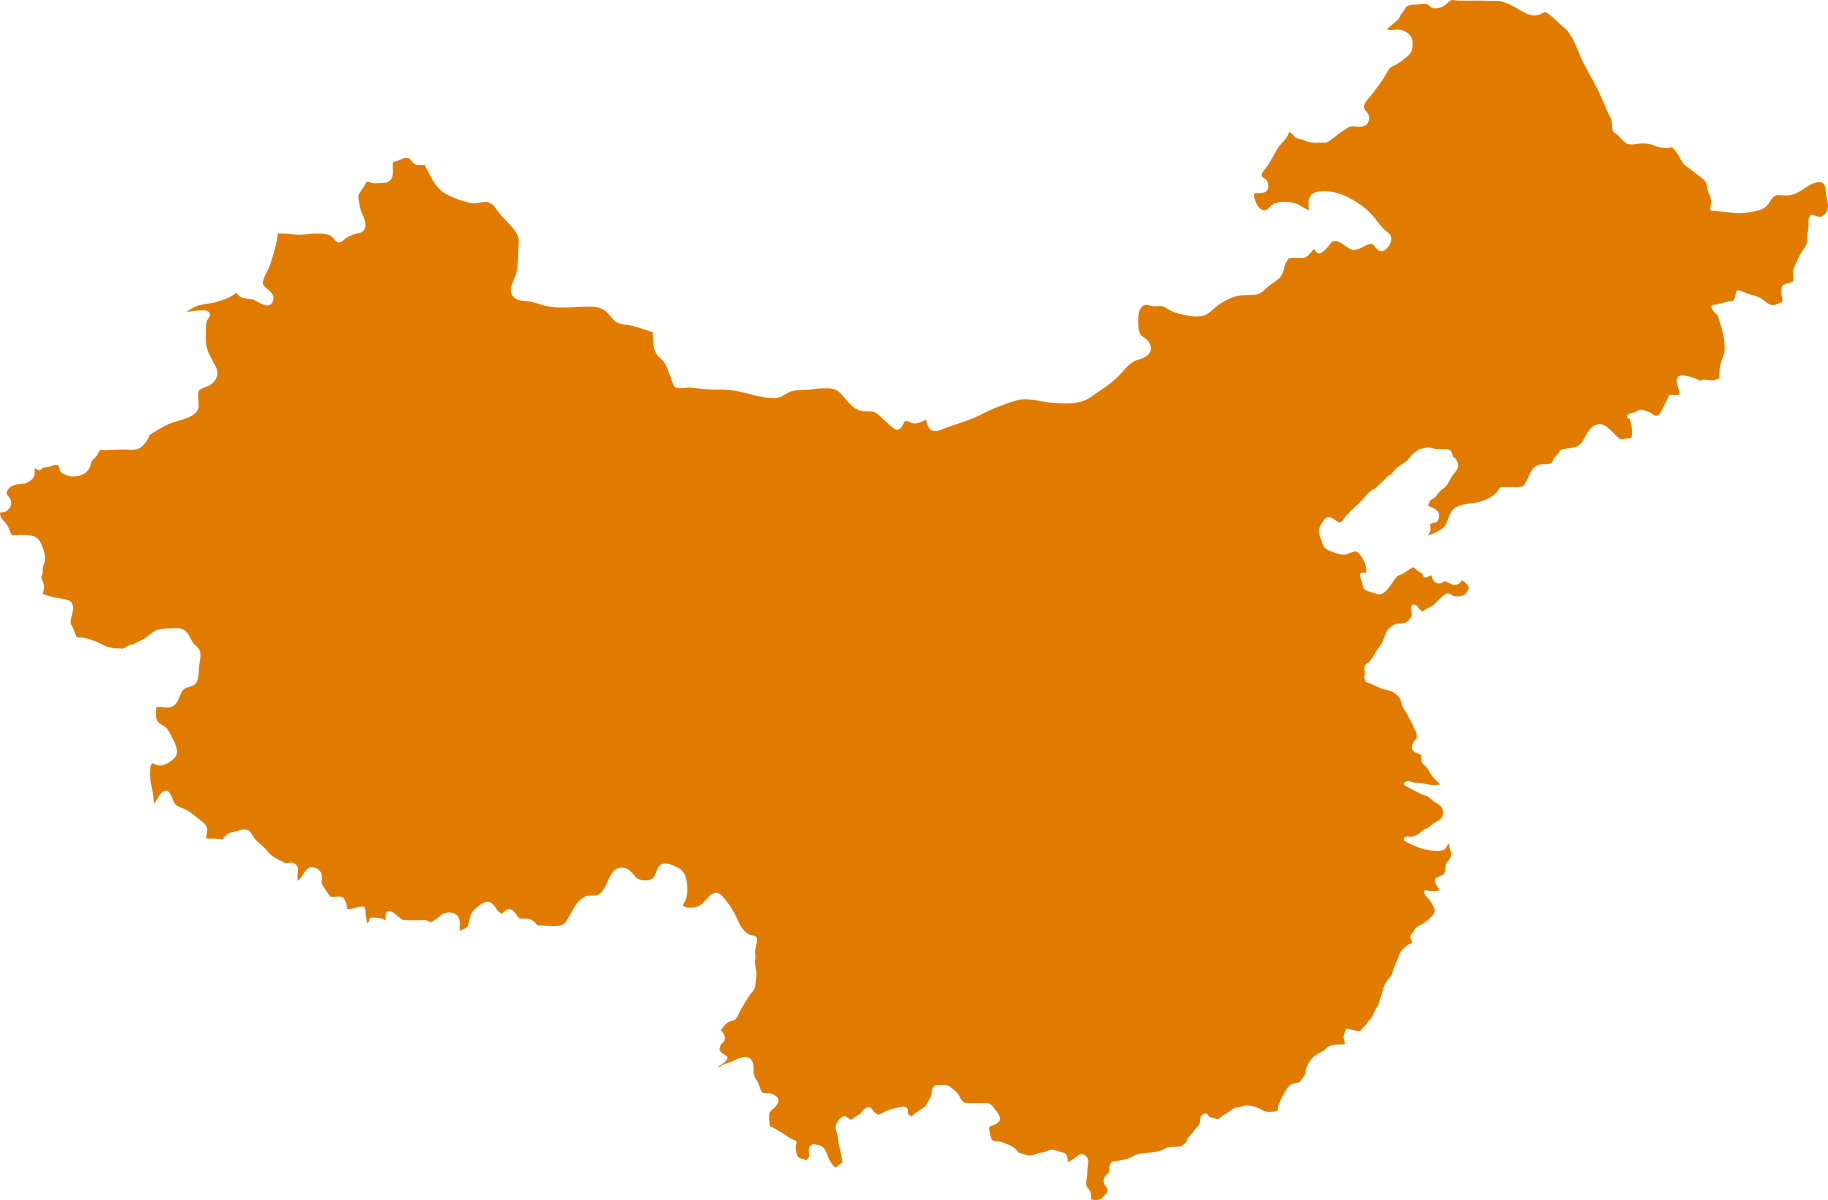 An Orange Outline Of A Country